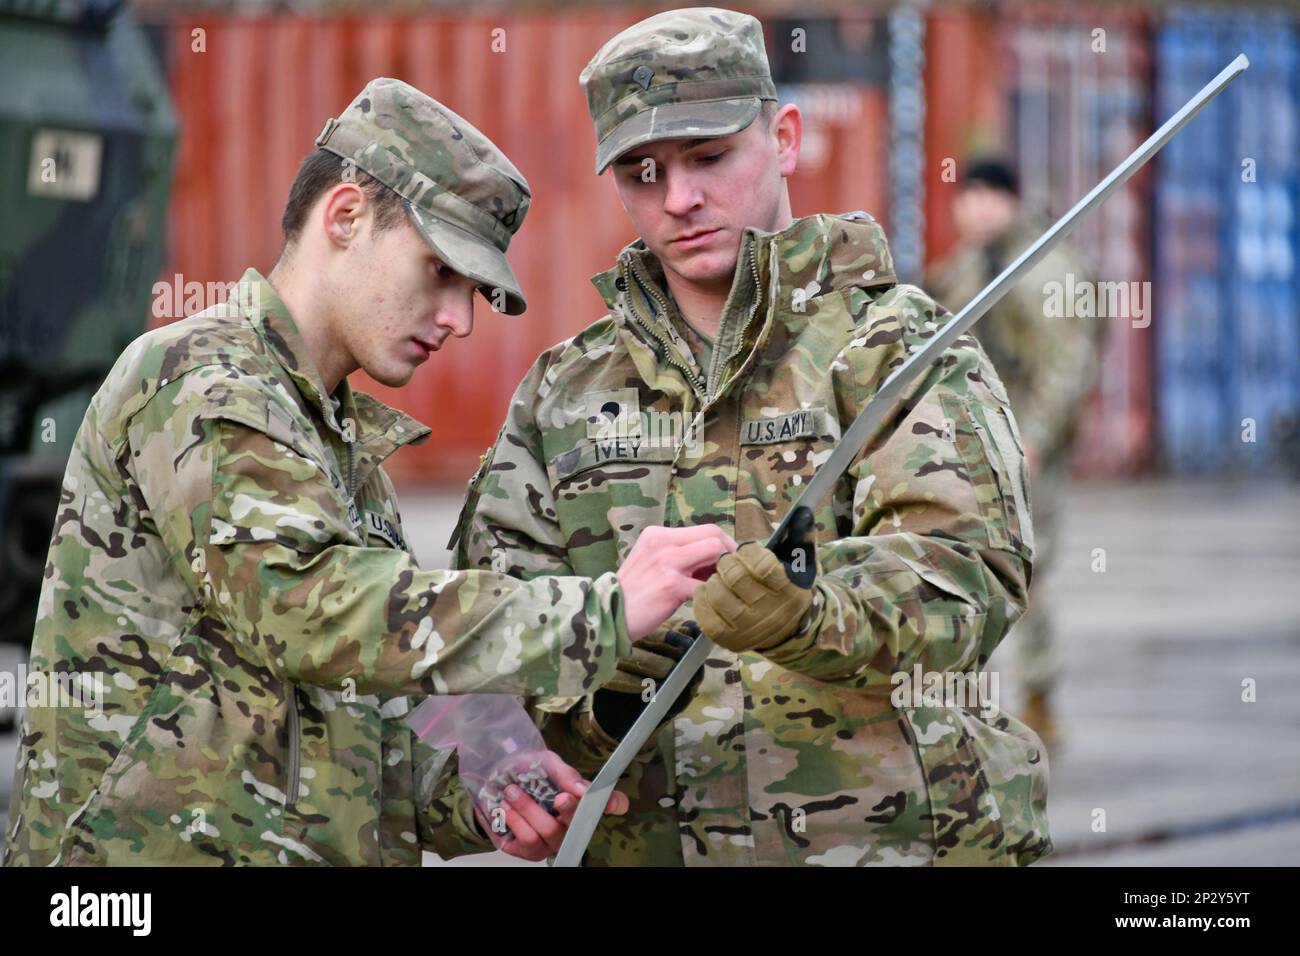 U.S. Army Spc. Charles Ivey, right, with Palehorse Troop, 4th Squadron, 2nd Cavalry Regiment supervises the assembly of an RQ-11 Raven, a Small Unmanned Aircraft System, ahead of a training exercise on Rose Barracks, Vilseck, Germany, Jan. 10, 2023. 2CR provides V Corps with a lethal and agile force capable of rapid deployment throughout the European theater in order to assure allies, deter adversaries, and when ordered, defend the NATO alliance. Stock Photo